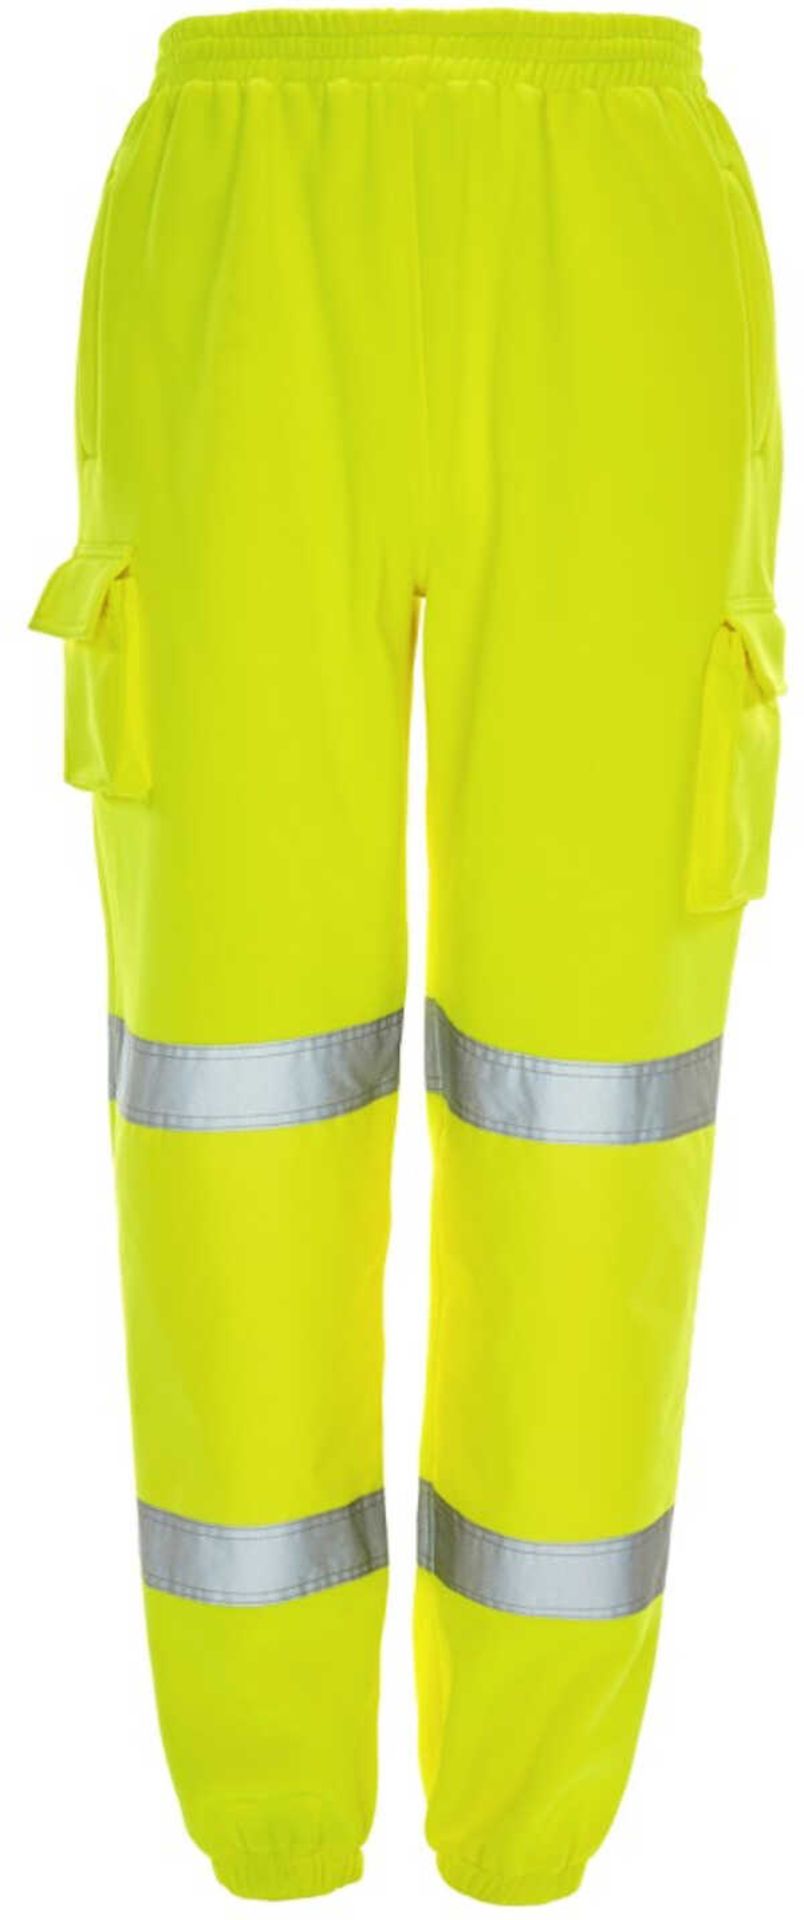 100pcs Brand New Vizwear High Viz Safety Trousers - Mix Of Assorted Sizes - Image 2 of 3